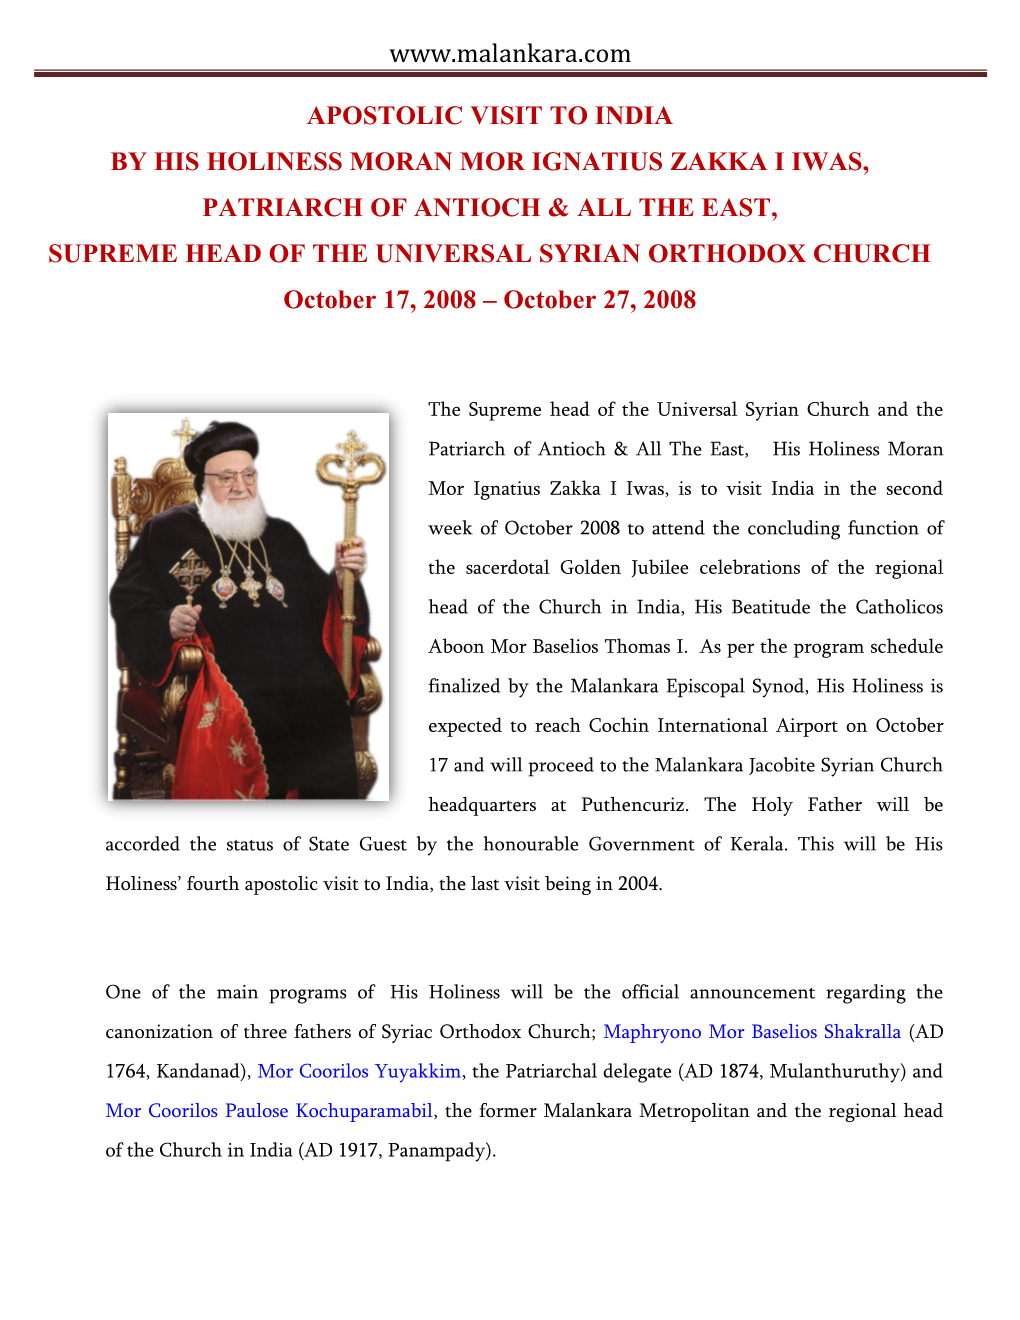 Apostolic Visit to India by His Holiness Moran Mor